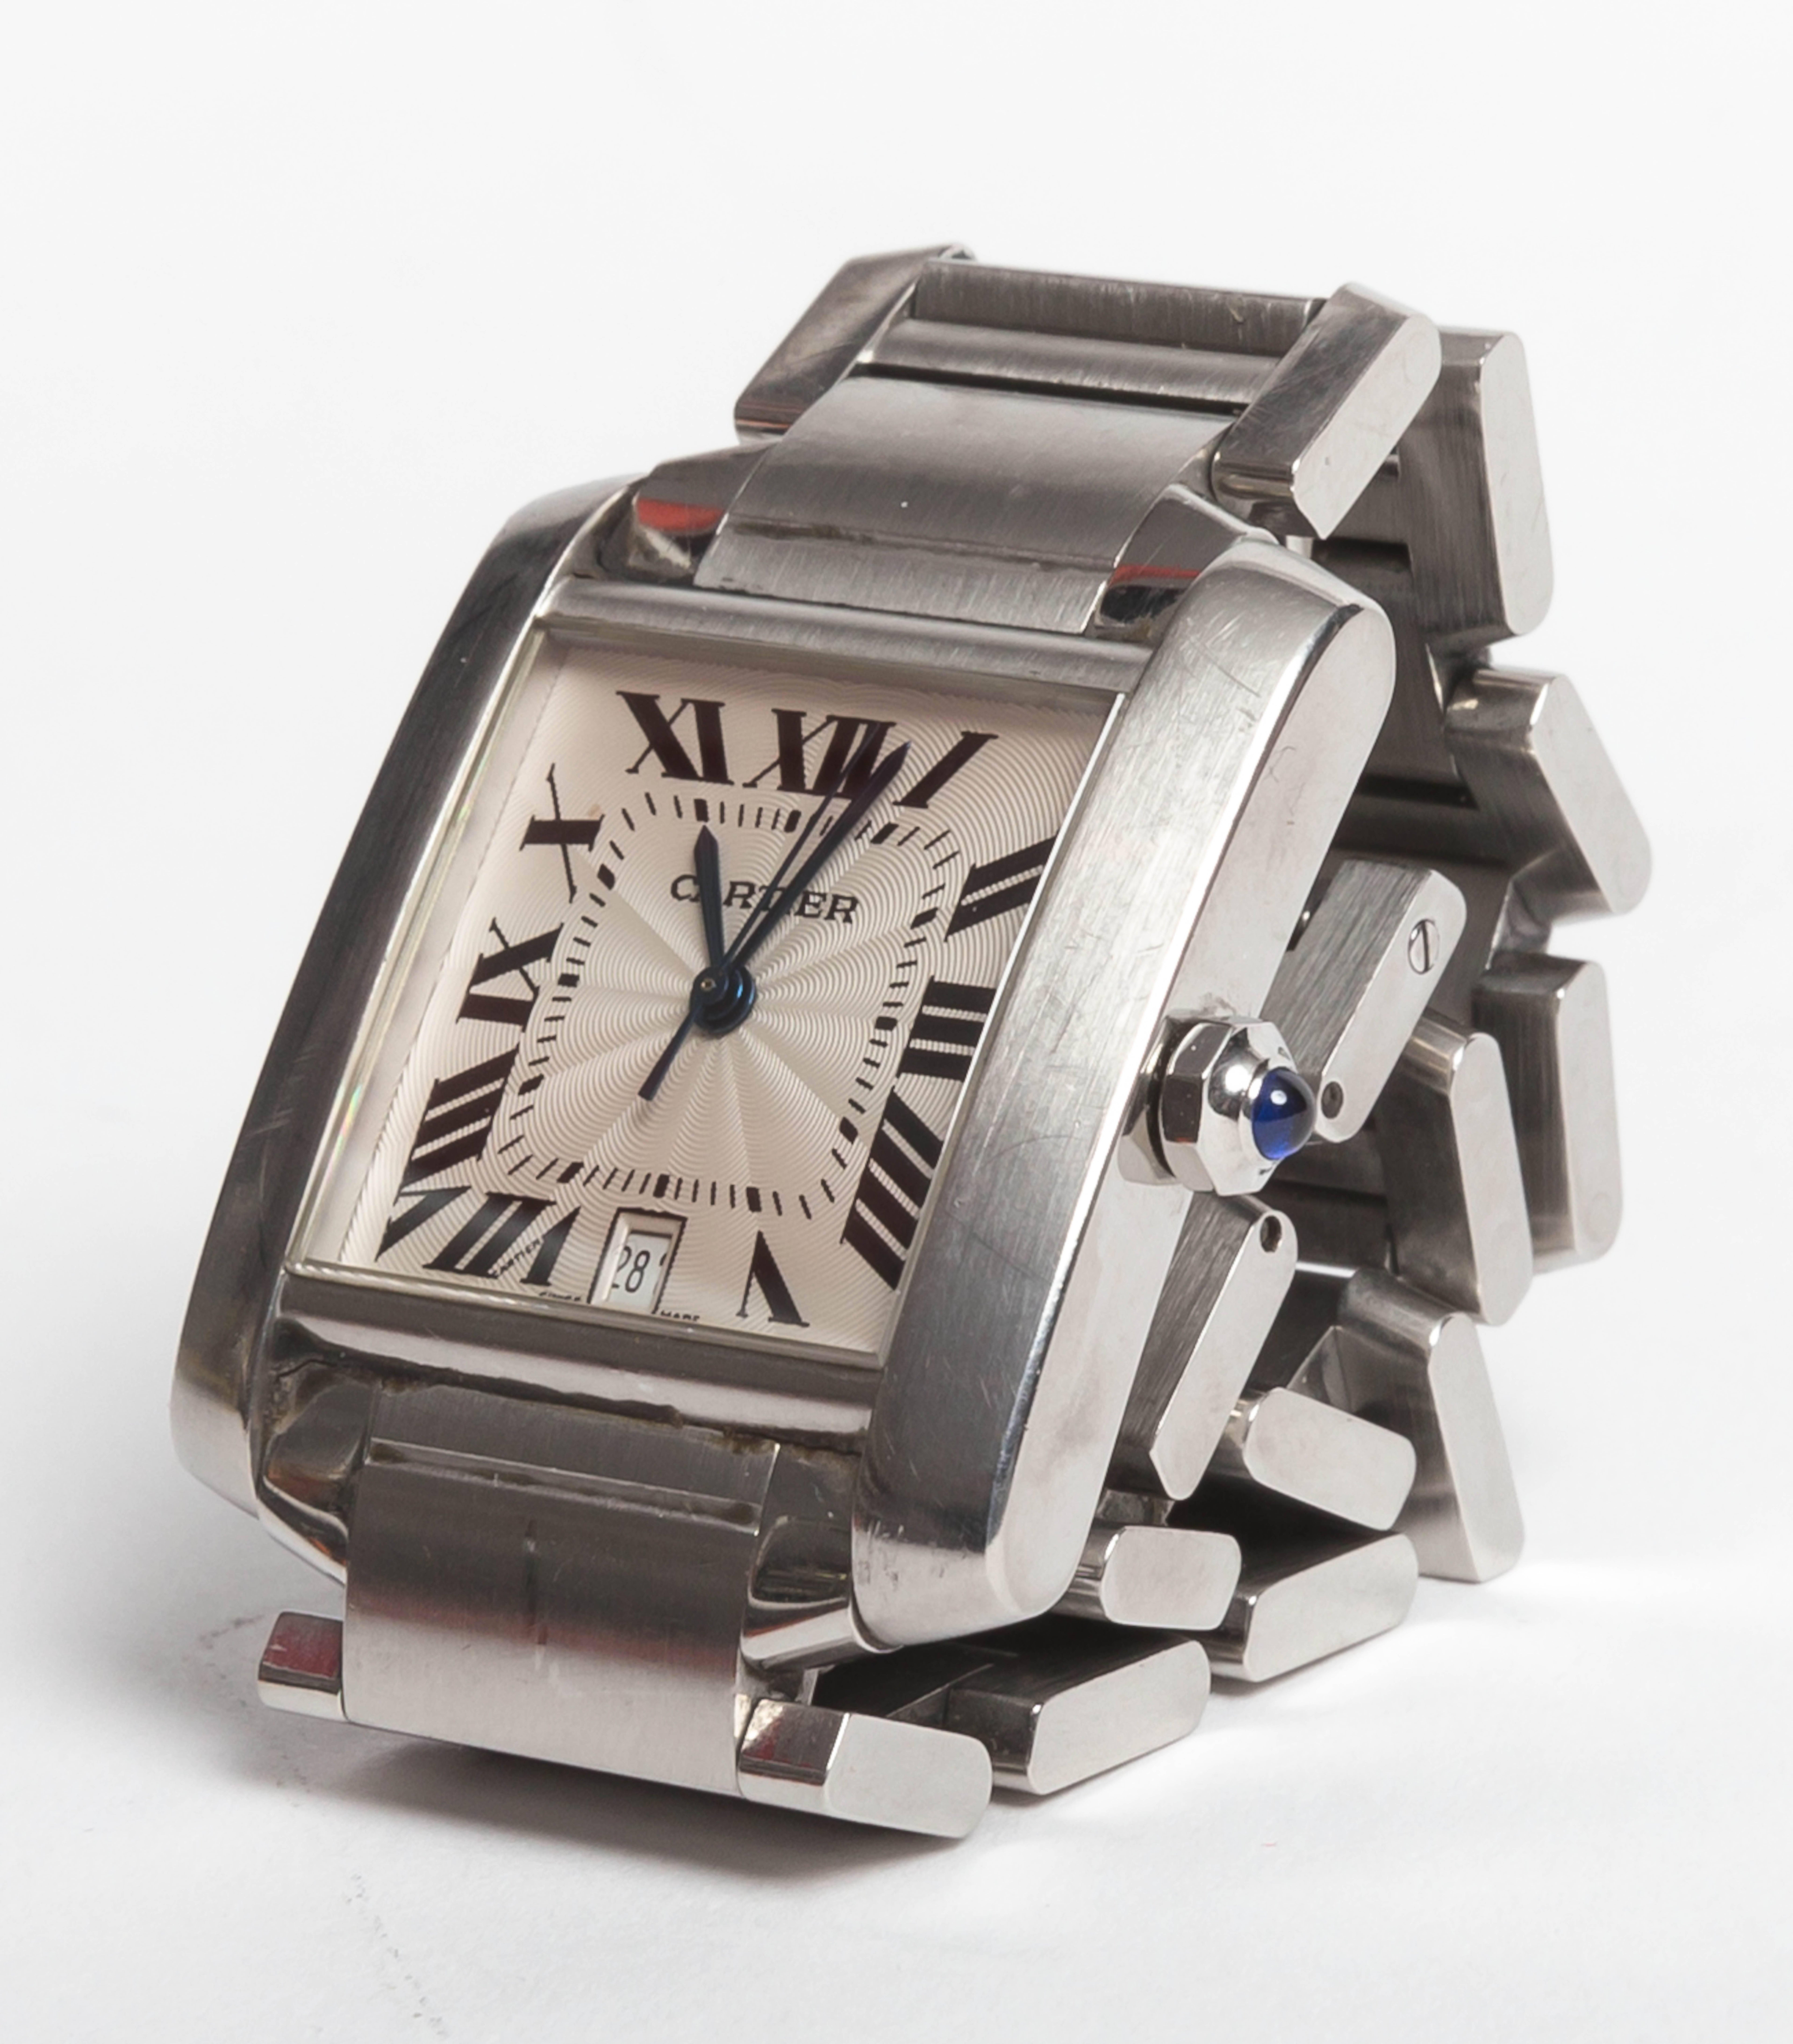 Stainless Steel Automatic Water Resistant Cartier Tank Francaise 
Model No 2302
Serial No CC864659
Box and Papers Are Not Included
Measures 28 x 32 mm
Guaranteed Authentic
Recently serviced and in excellent working order.
